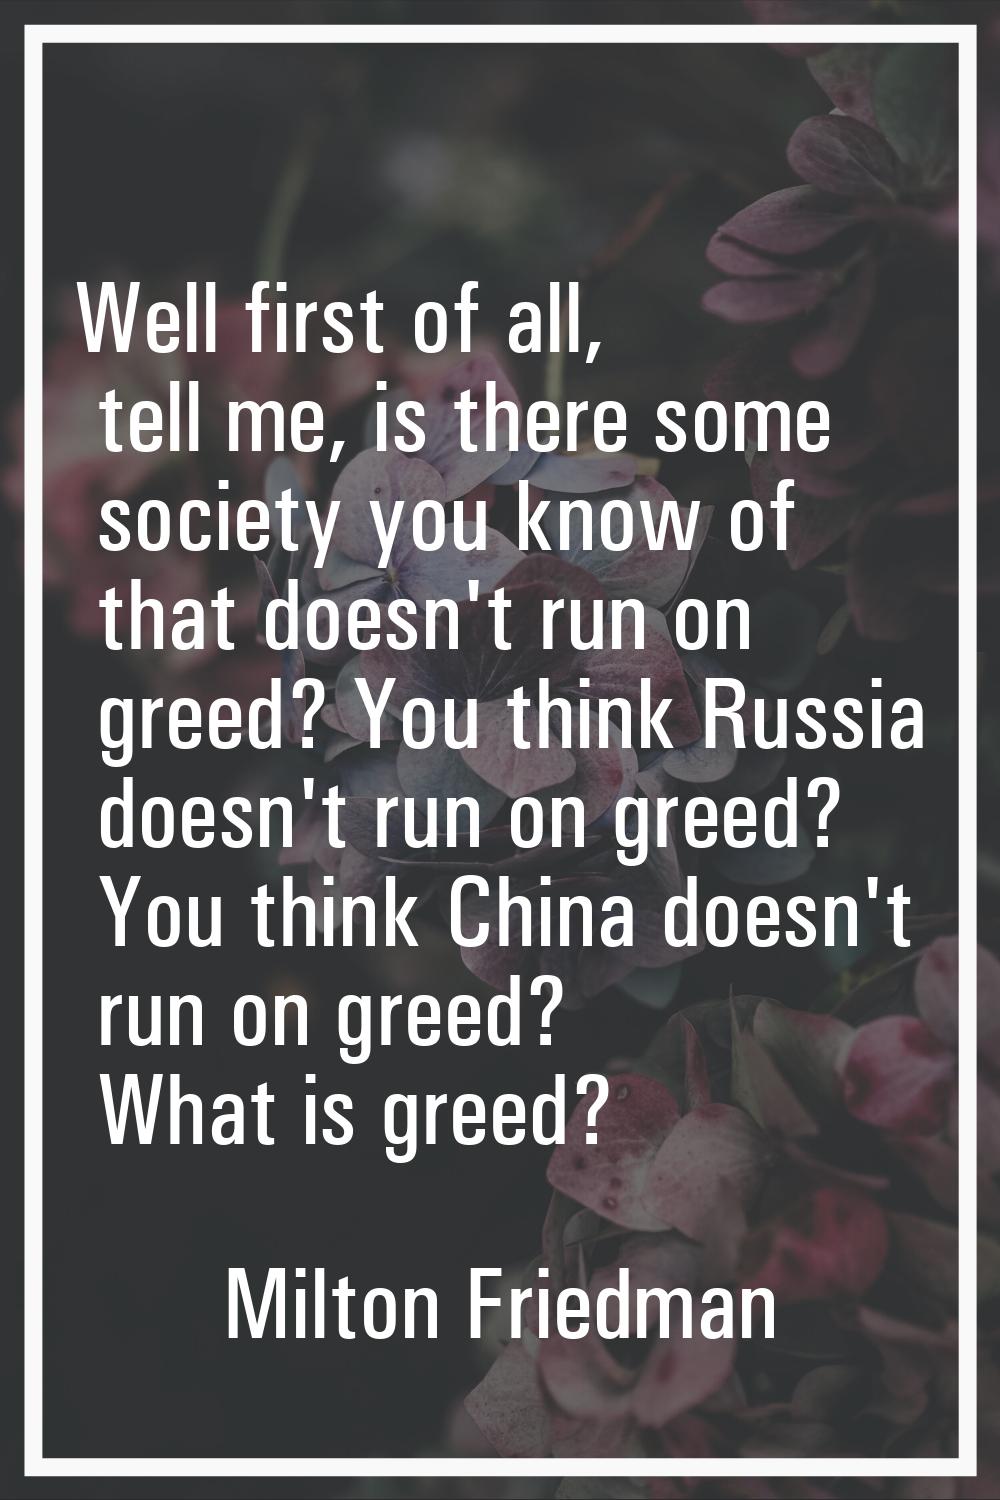 Well first of all, tell me, is there some society you know of that doesn't run on greed? You think 